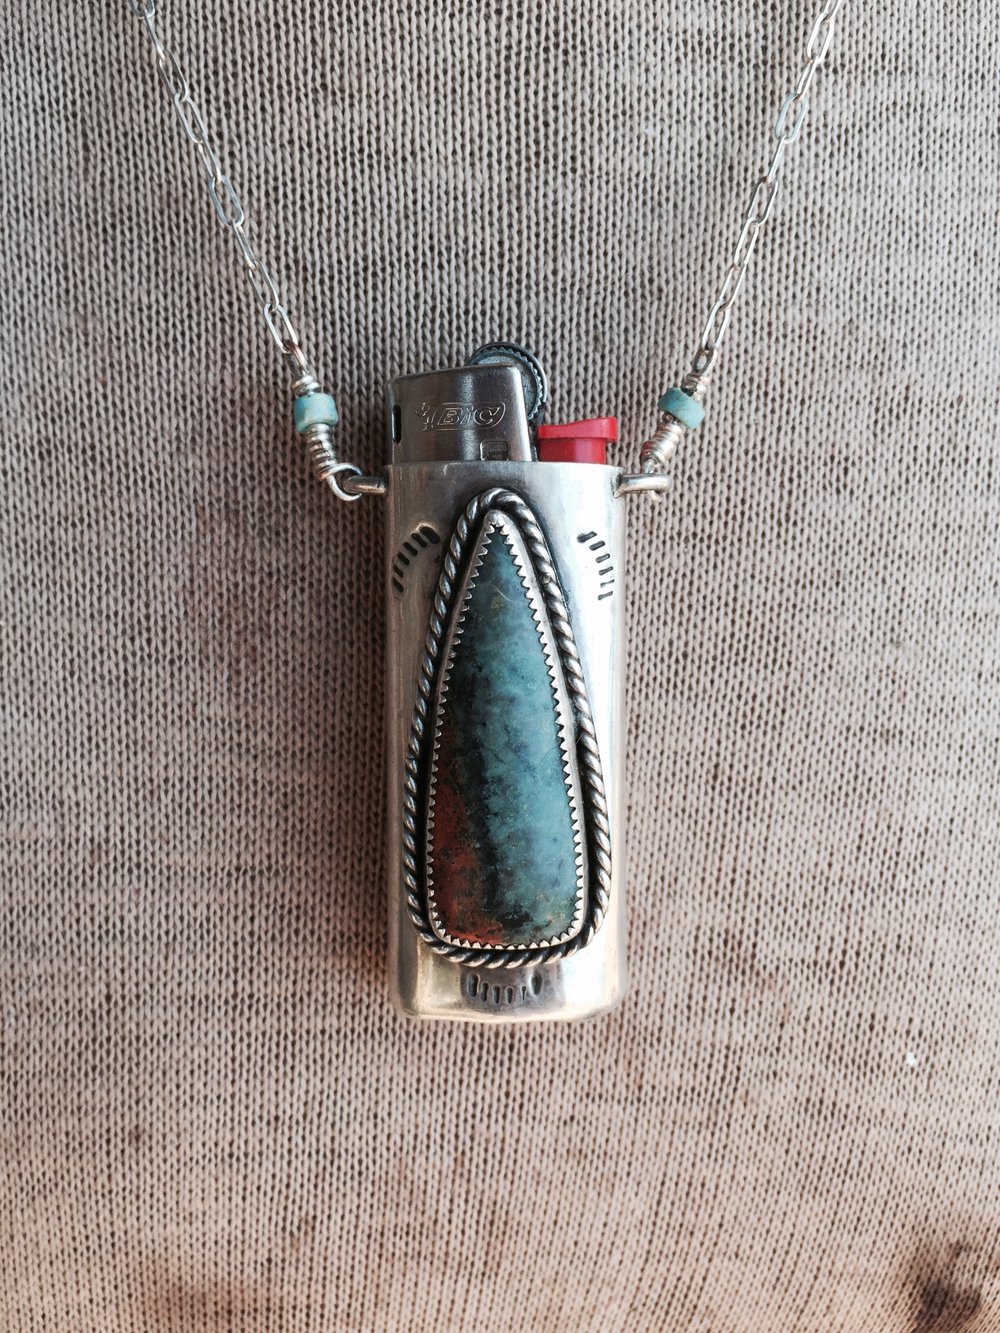 Image of SONORA SUNRISE & SILVER MINI BIC LIGHTER SLEEVE NECKLACE